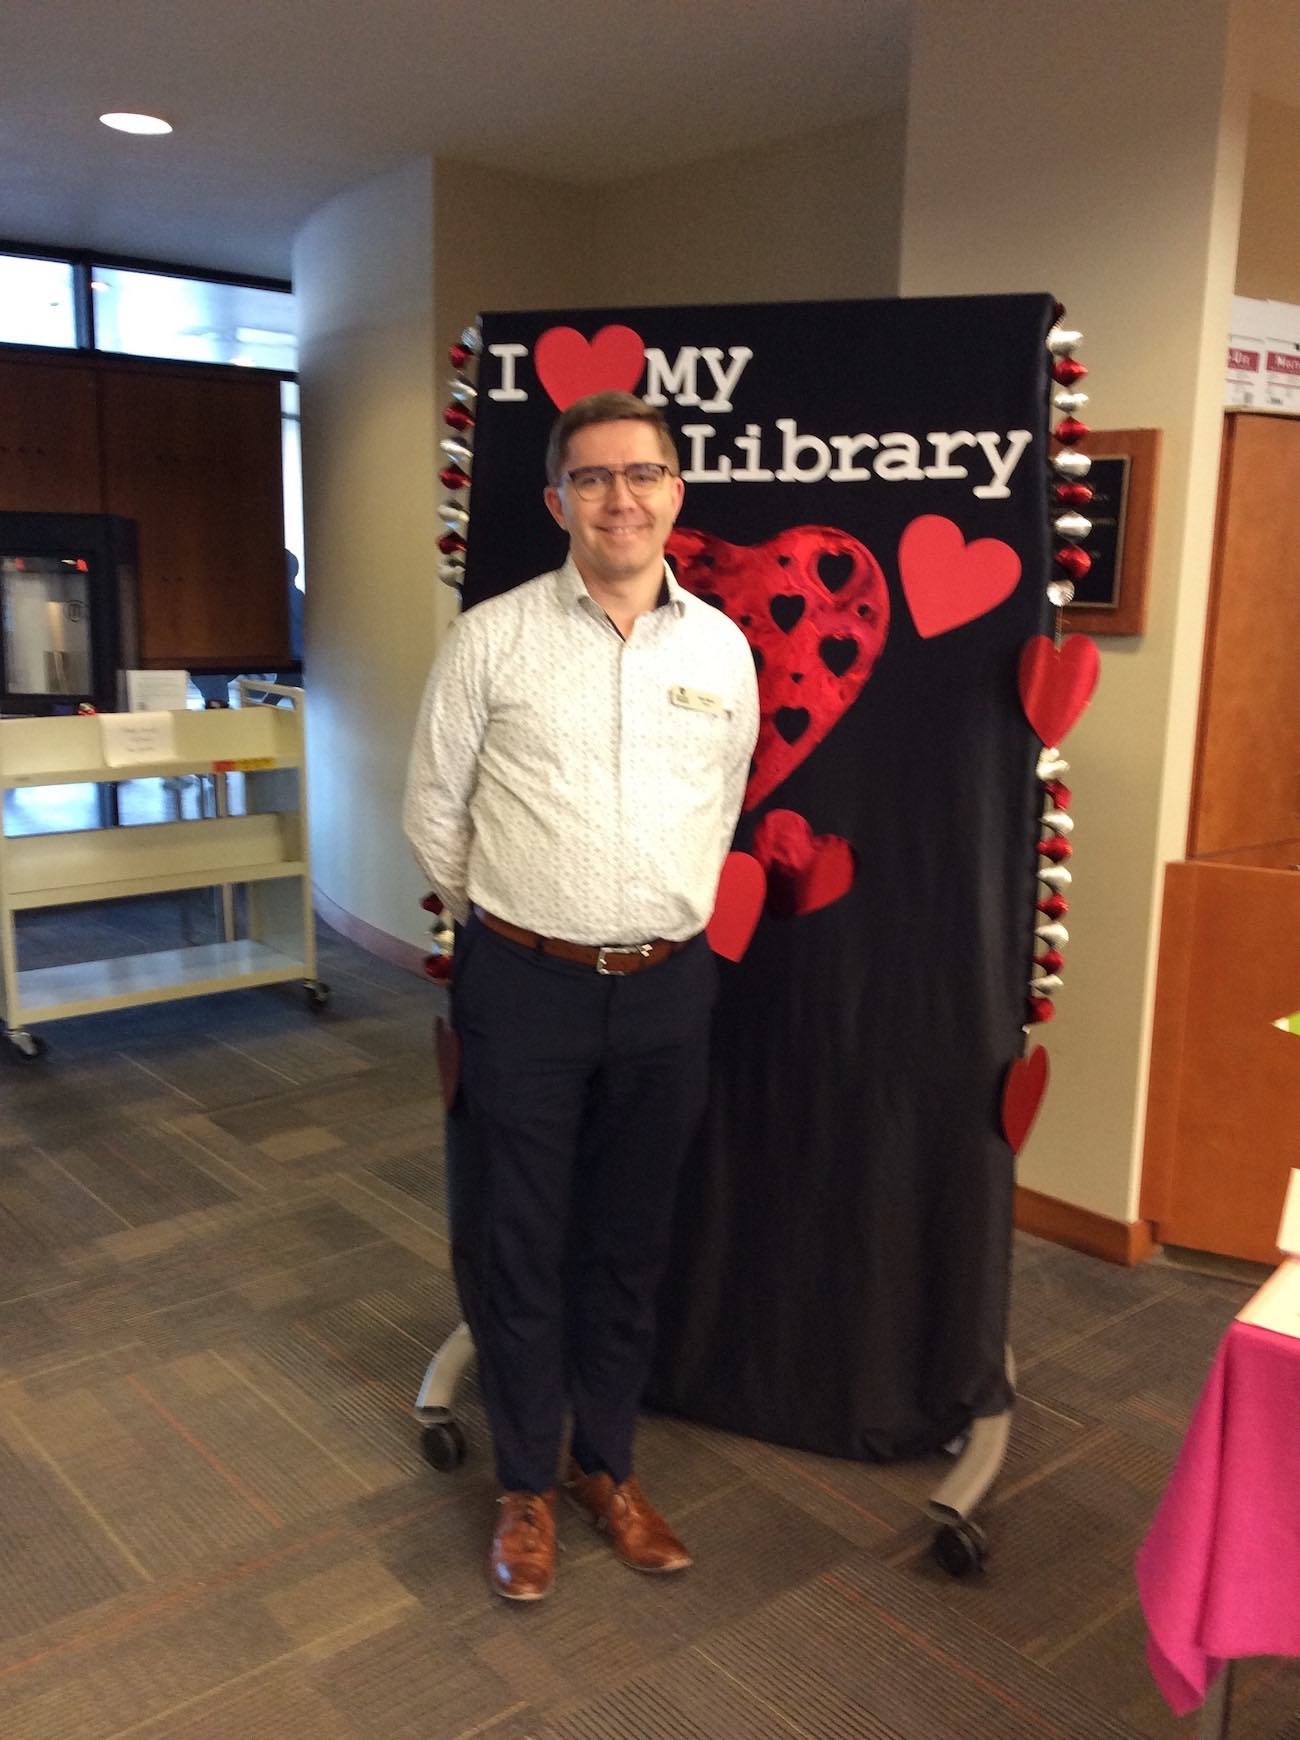 Associate University Librarian for Content Management and Discovery Dale Storie stands in front of the I love my library backdrop with his hands behind his back, smiling